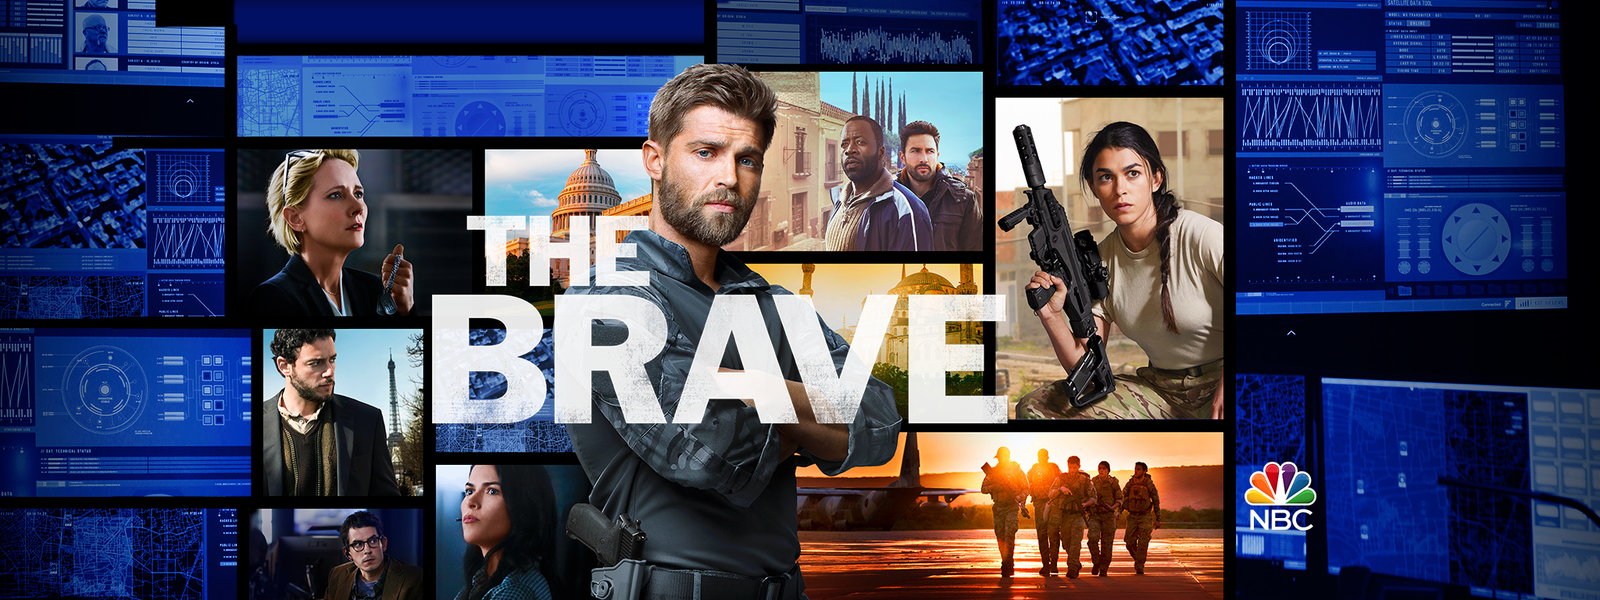 When Does The Brave Season 2 Start On NBC? Release Date